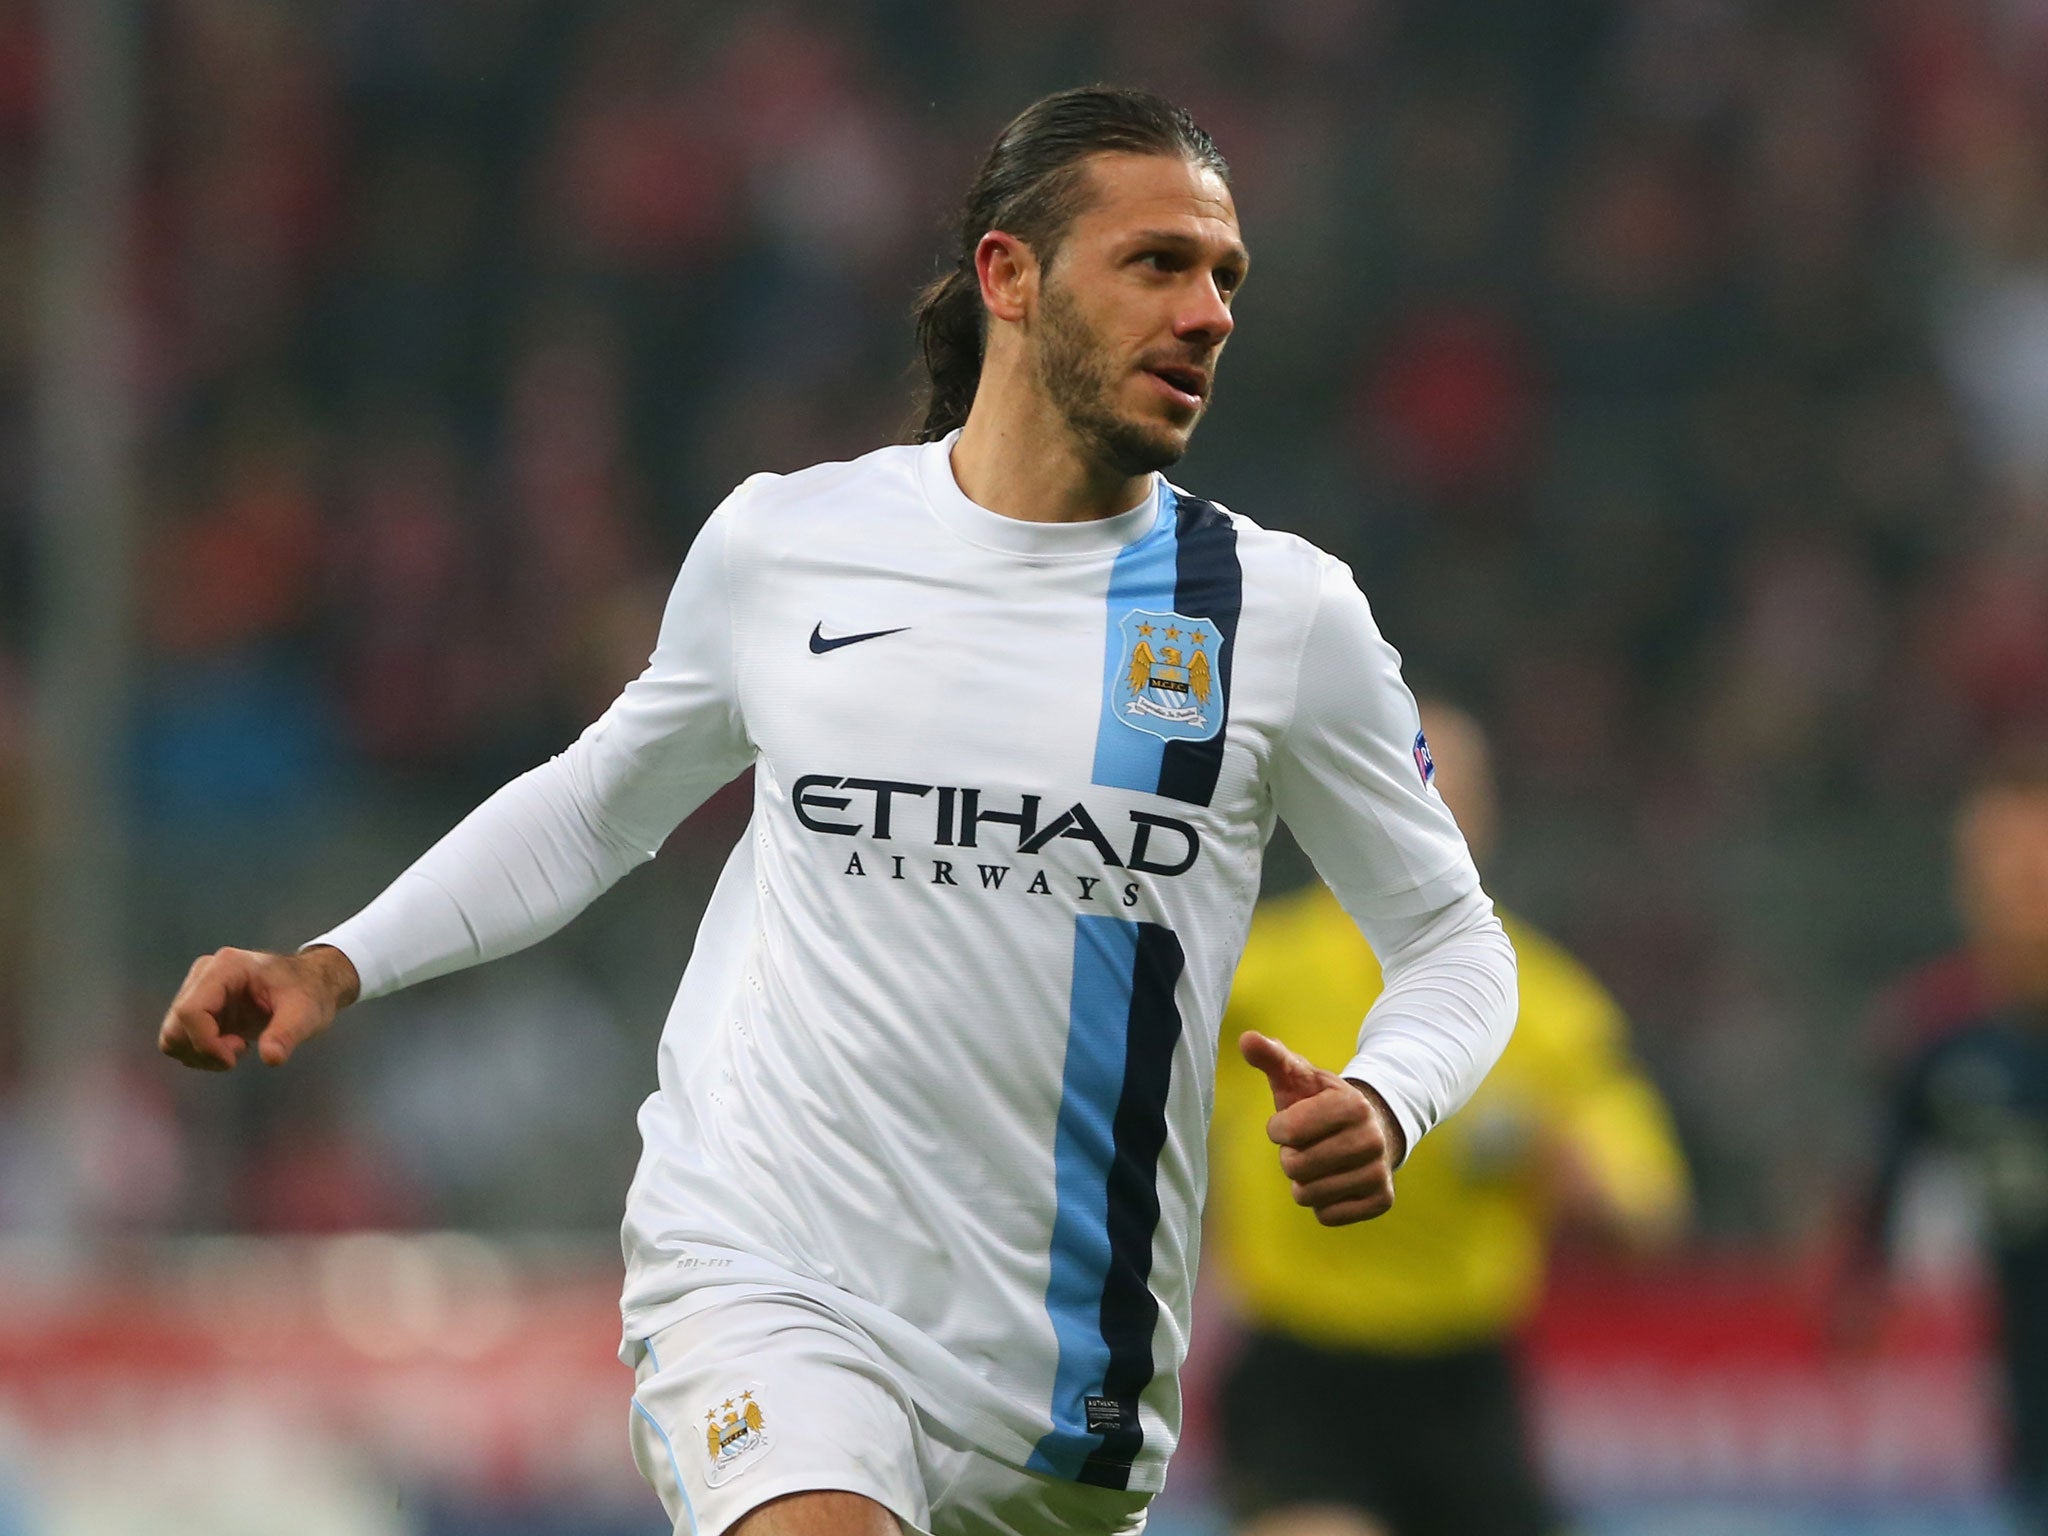 City’s only outlay on defensive players last summer was £3.5m on Martin Demichelis